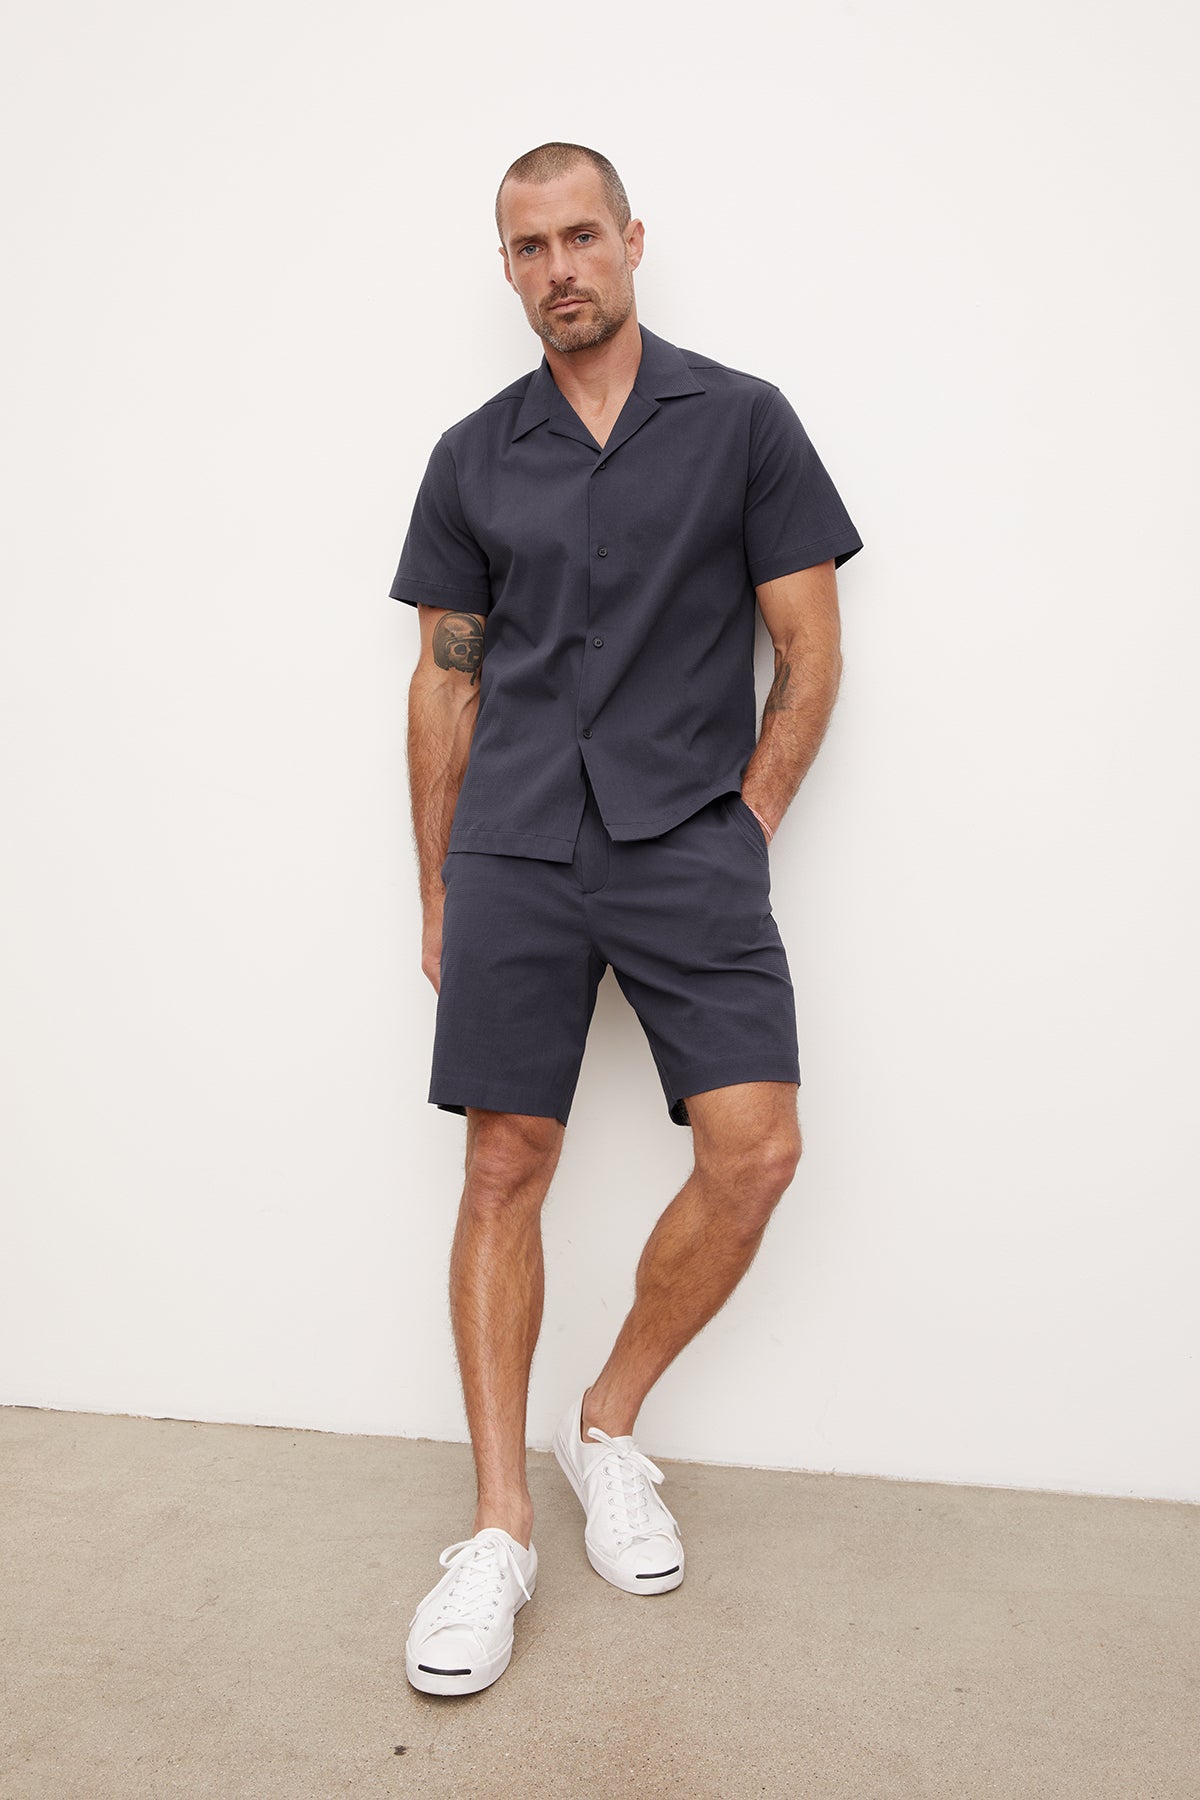   A man in a navy blue seersucker cotton FRANK BUTTON-UP SHIRT and matching shorts stands against a white background. He wears white sneakers and has a tattoo on his left arm. (Brand Name: Velvet by Graham & Spencer) 